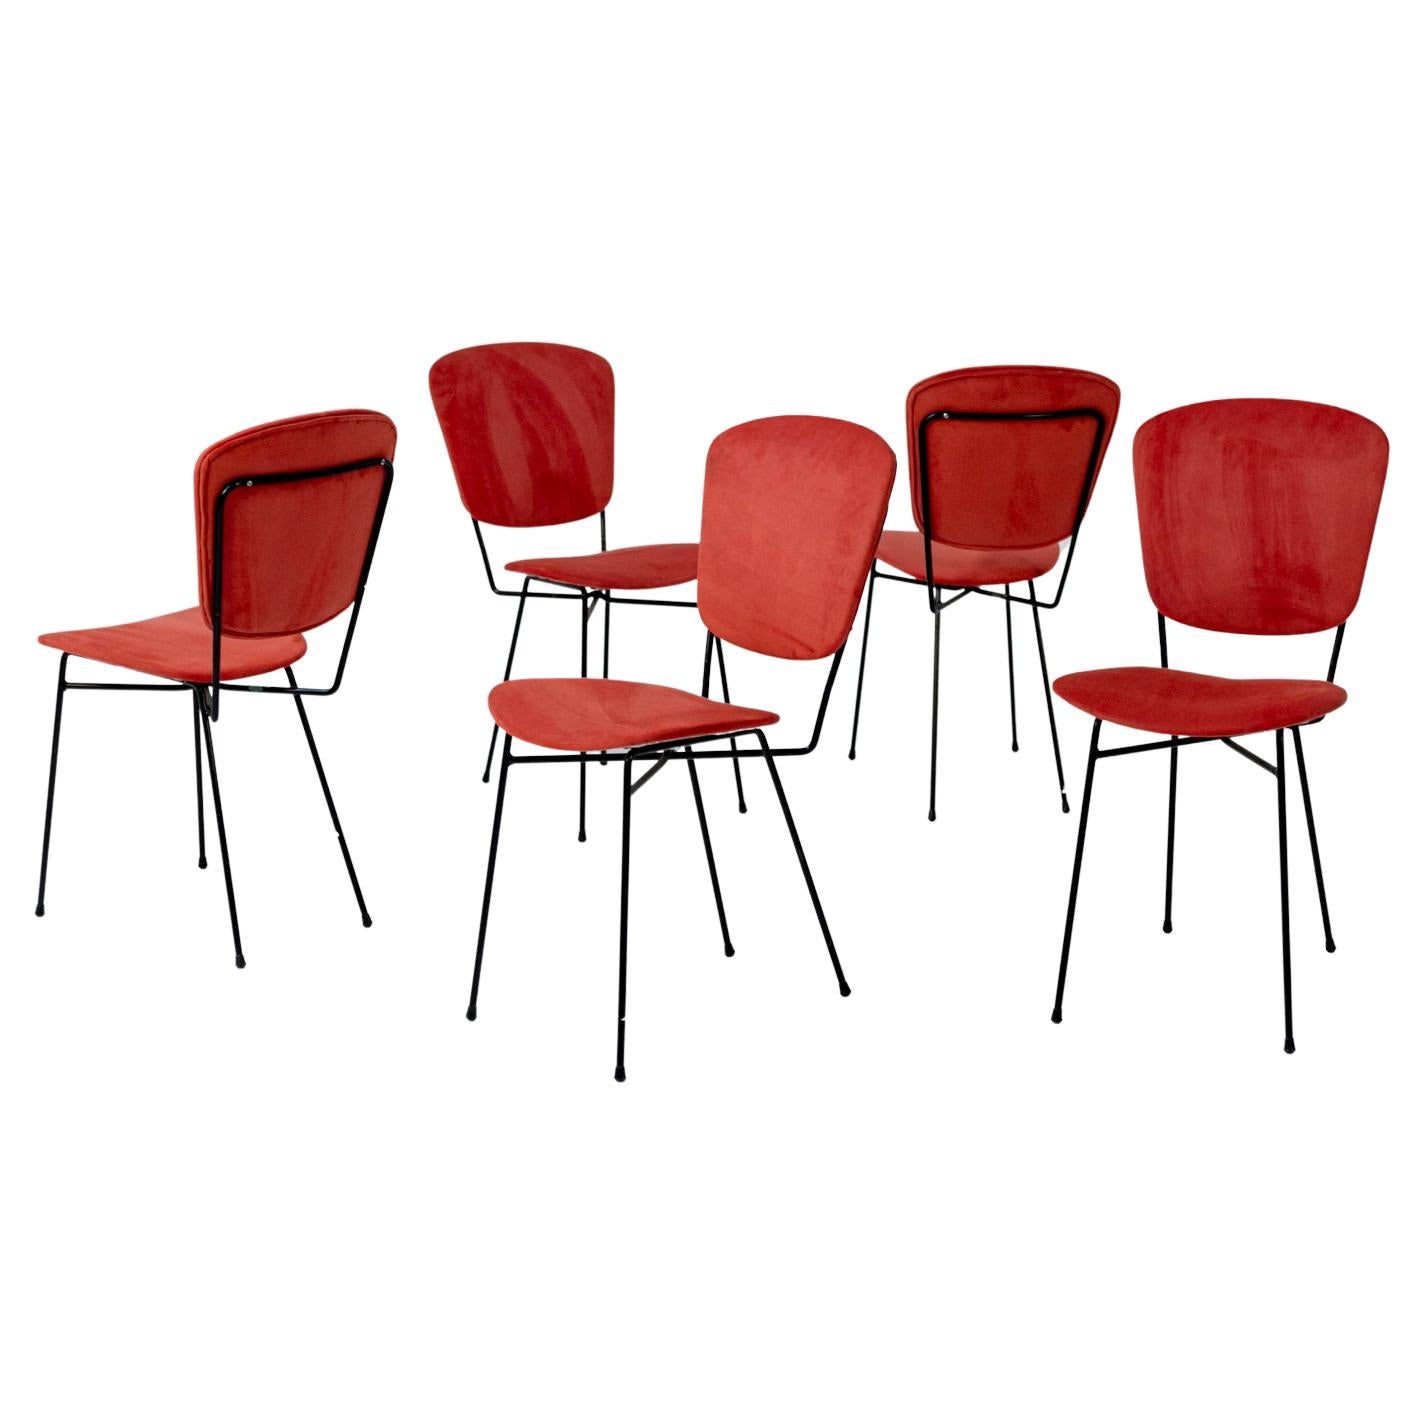 Set of Five Chairs Produced by Doro Cuneo in Iron and Red Cotton